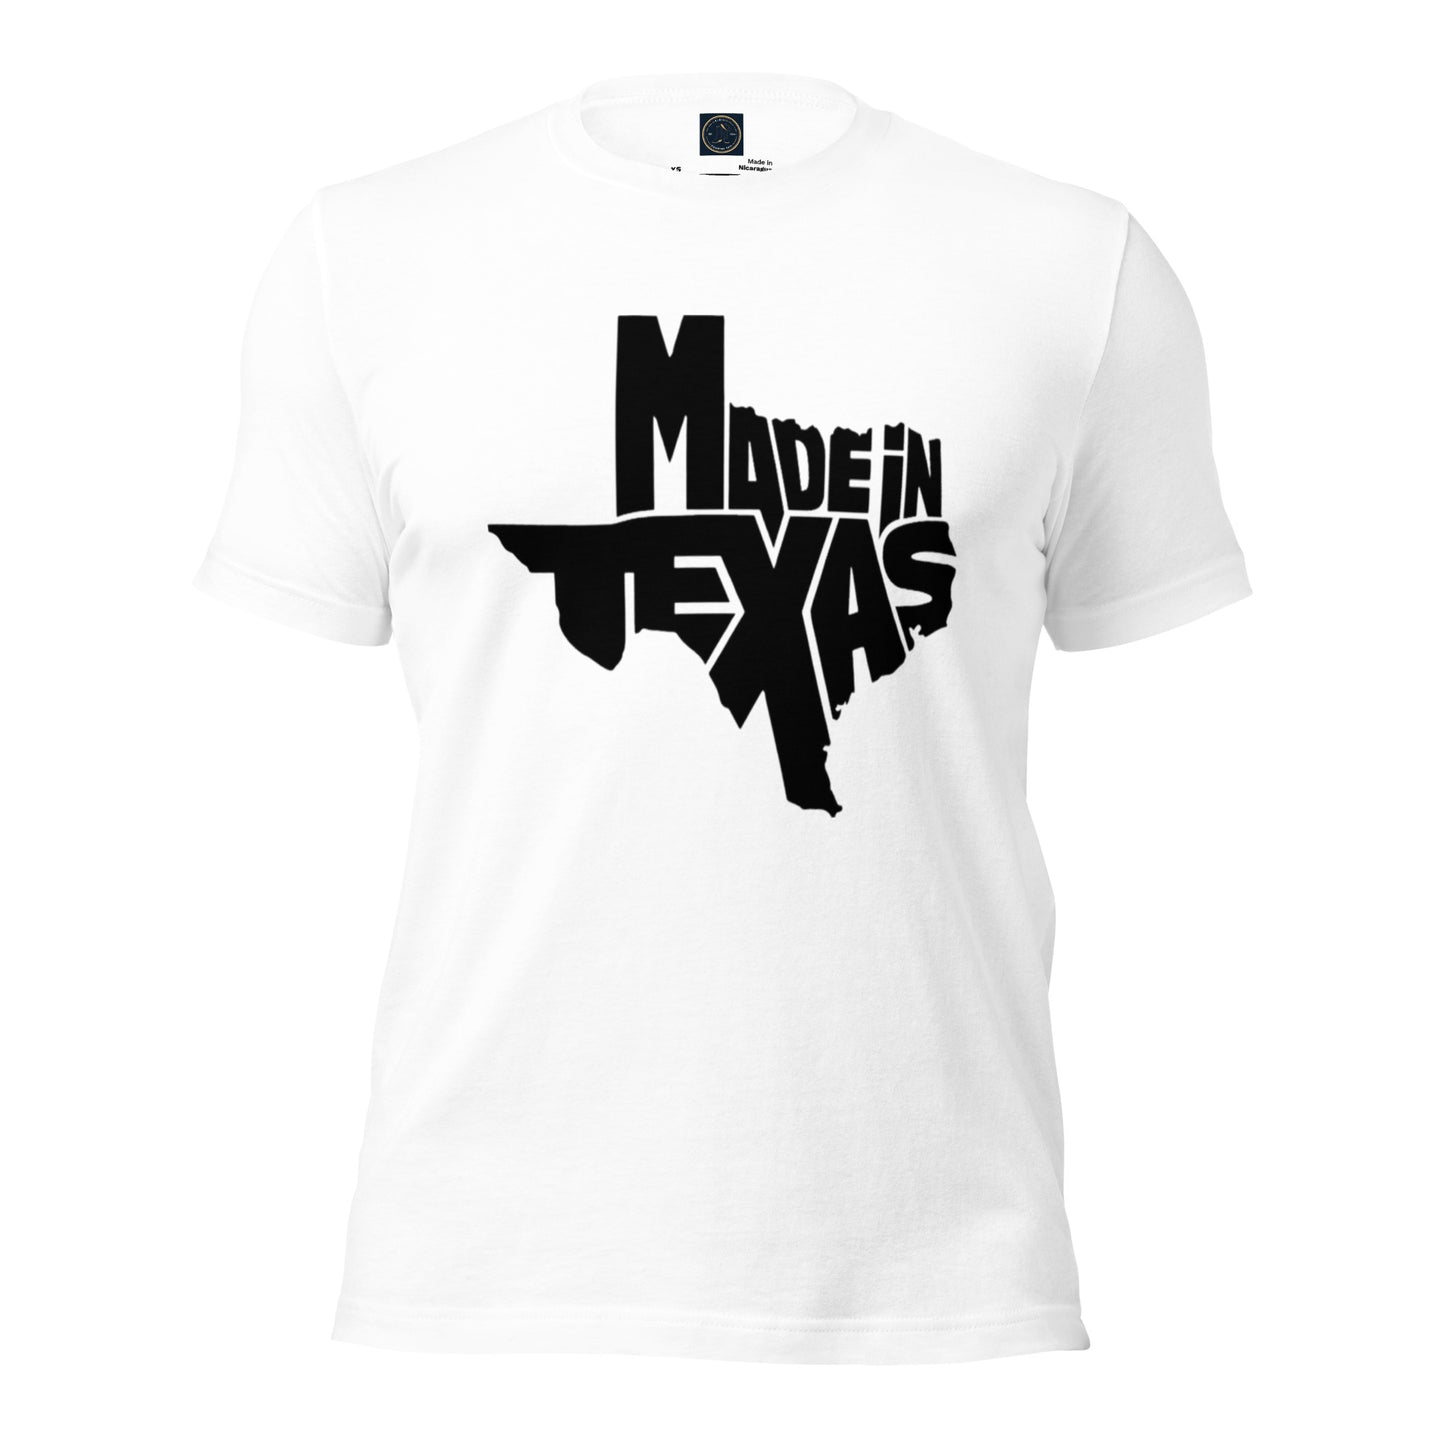 Made In Texas - Classic Country Tees